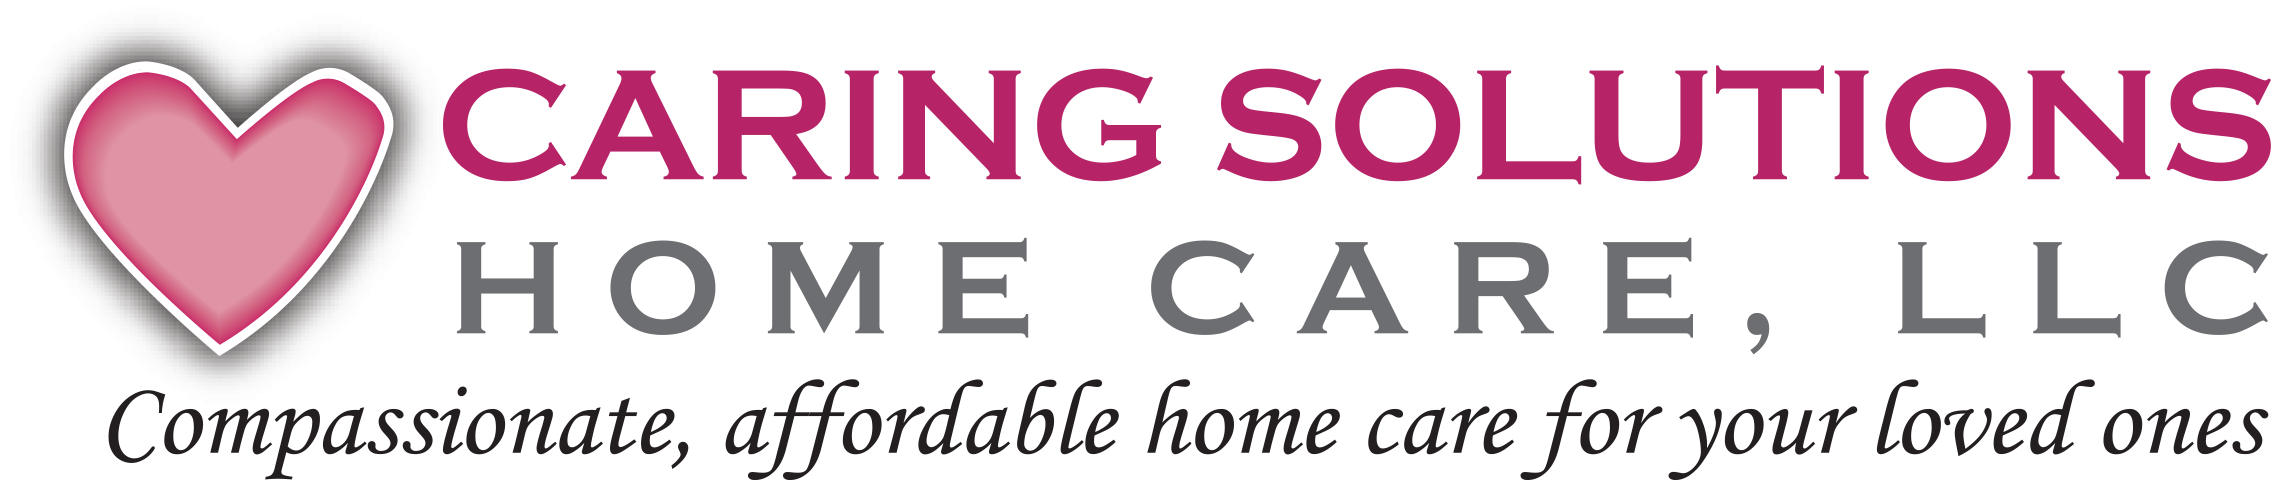 Caring Solutions Home Care, LLC